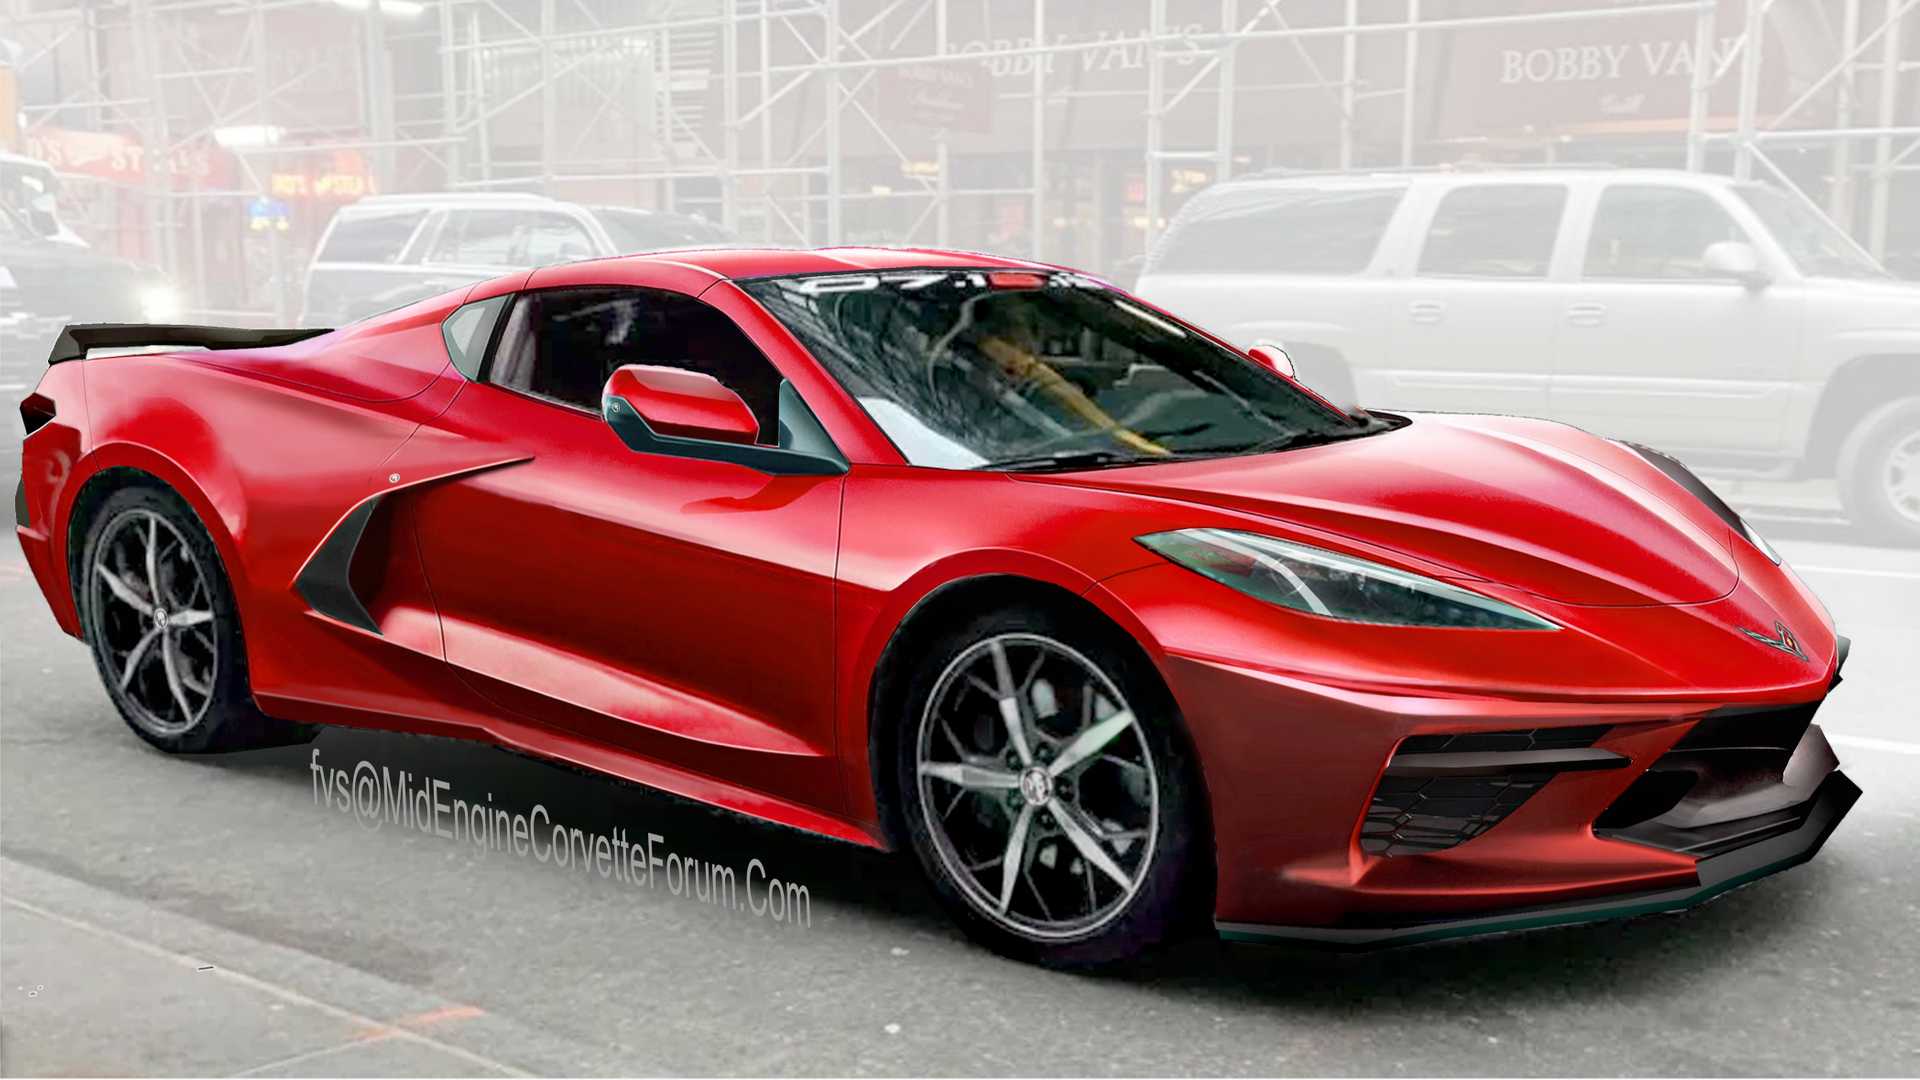 Mid Engined C8 Corvette Rendering Might Reveal The Final Design